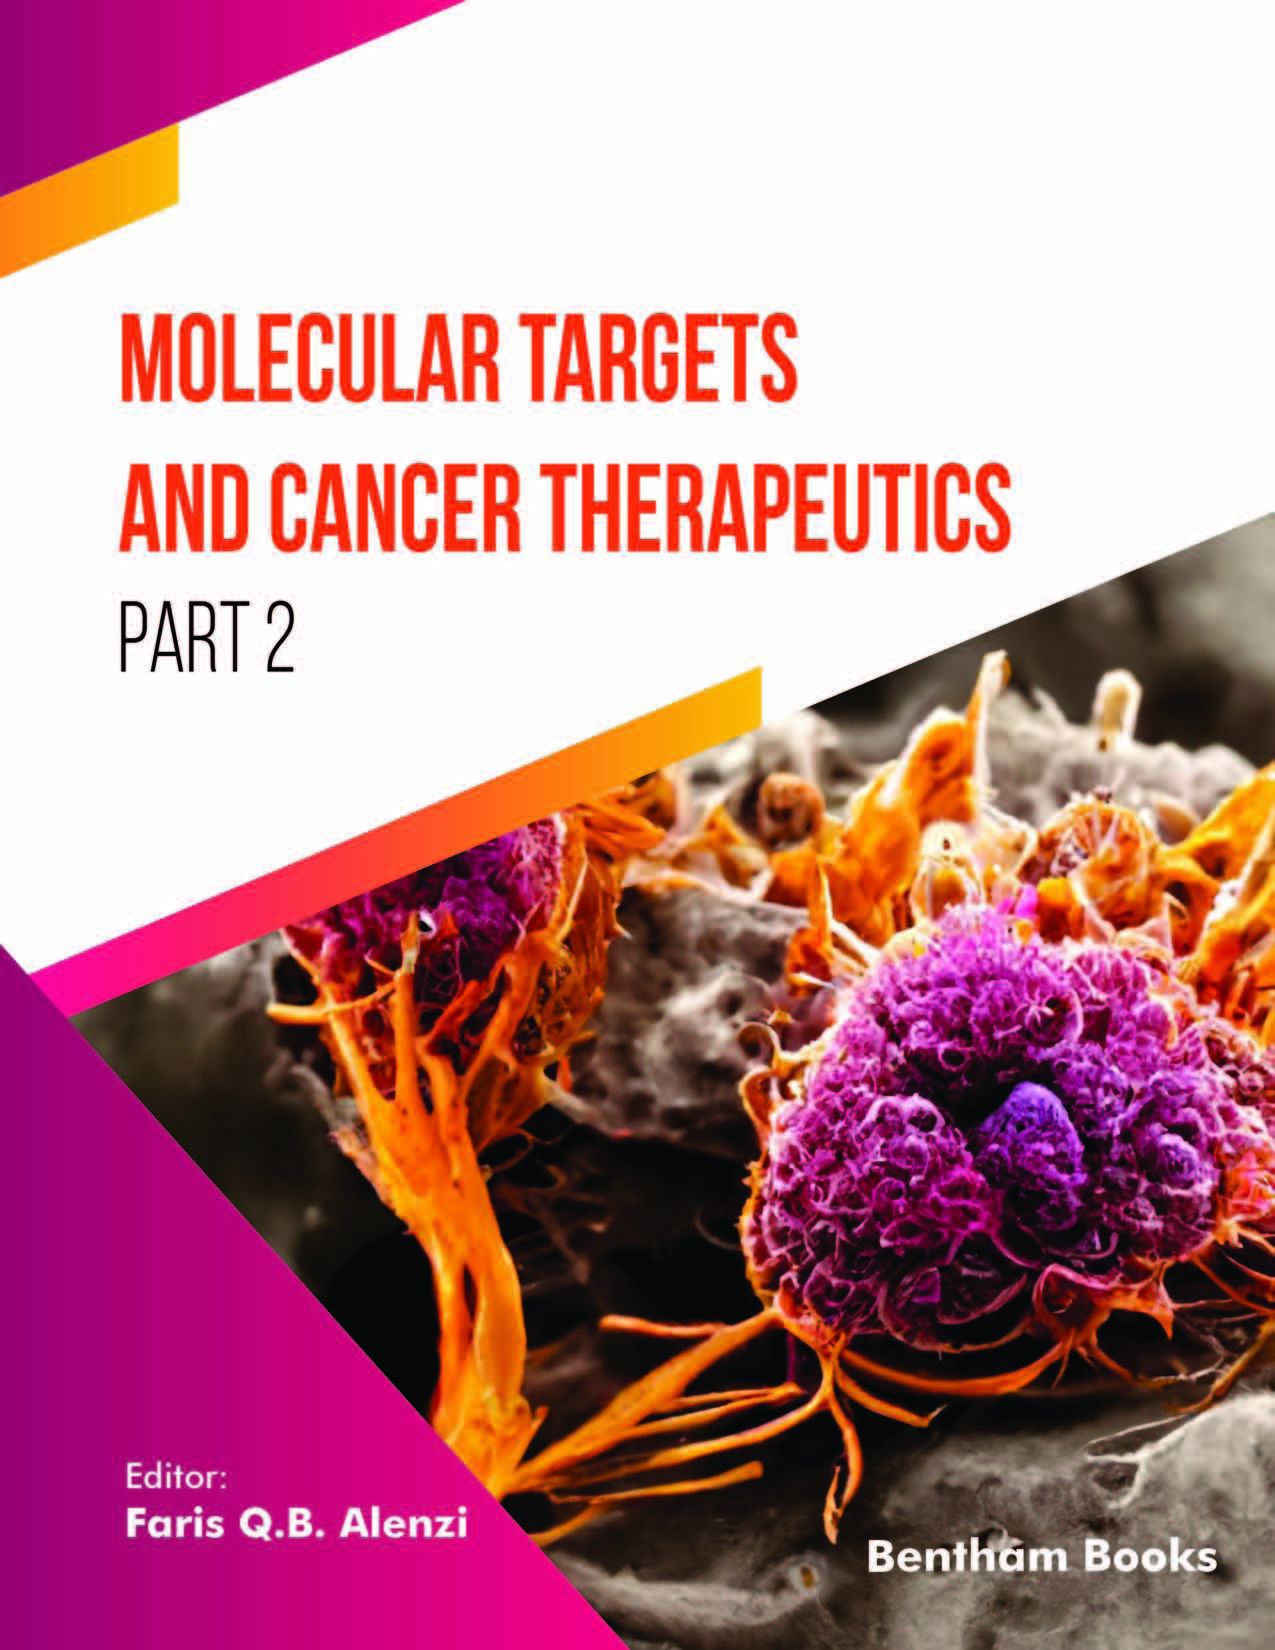 Molecular Targets and Cancer Therapeutics (Part 2)